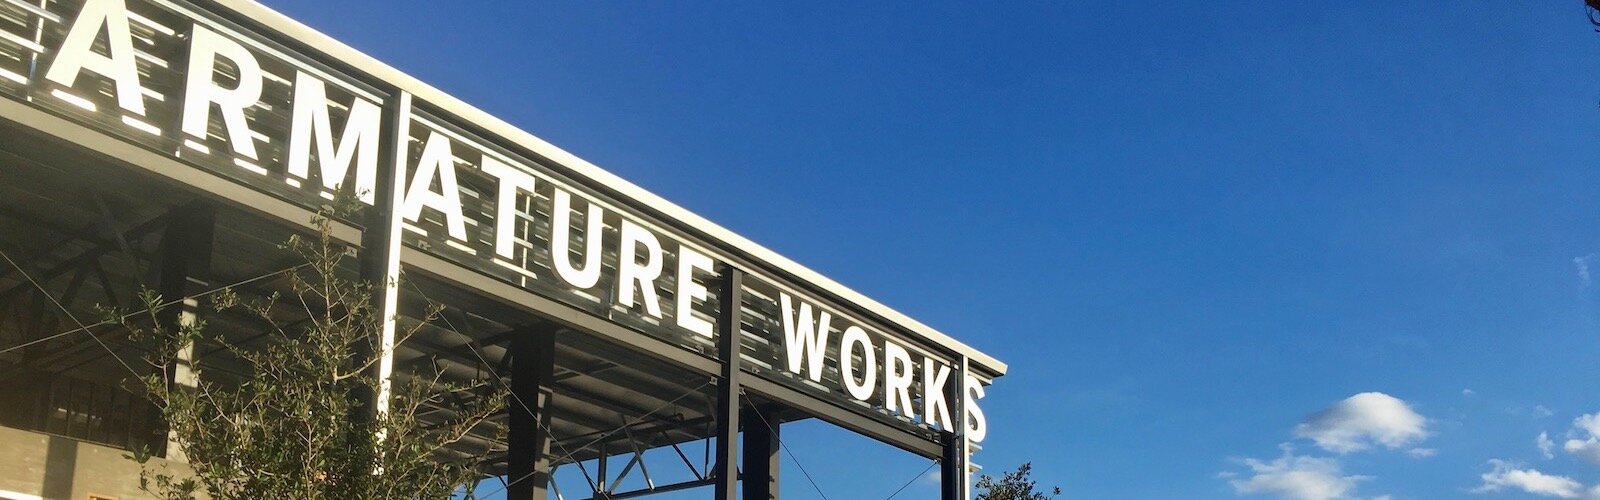 Armature Works is a catalyst for change in Tampa Heights.